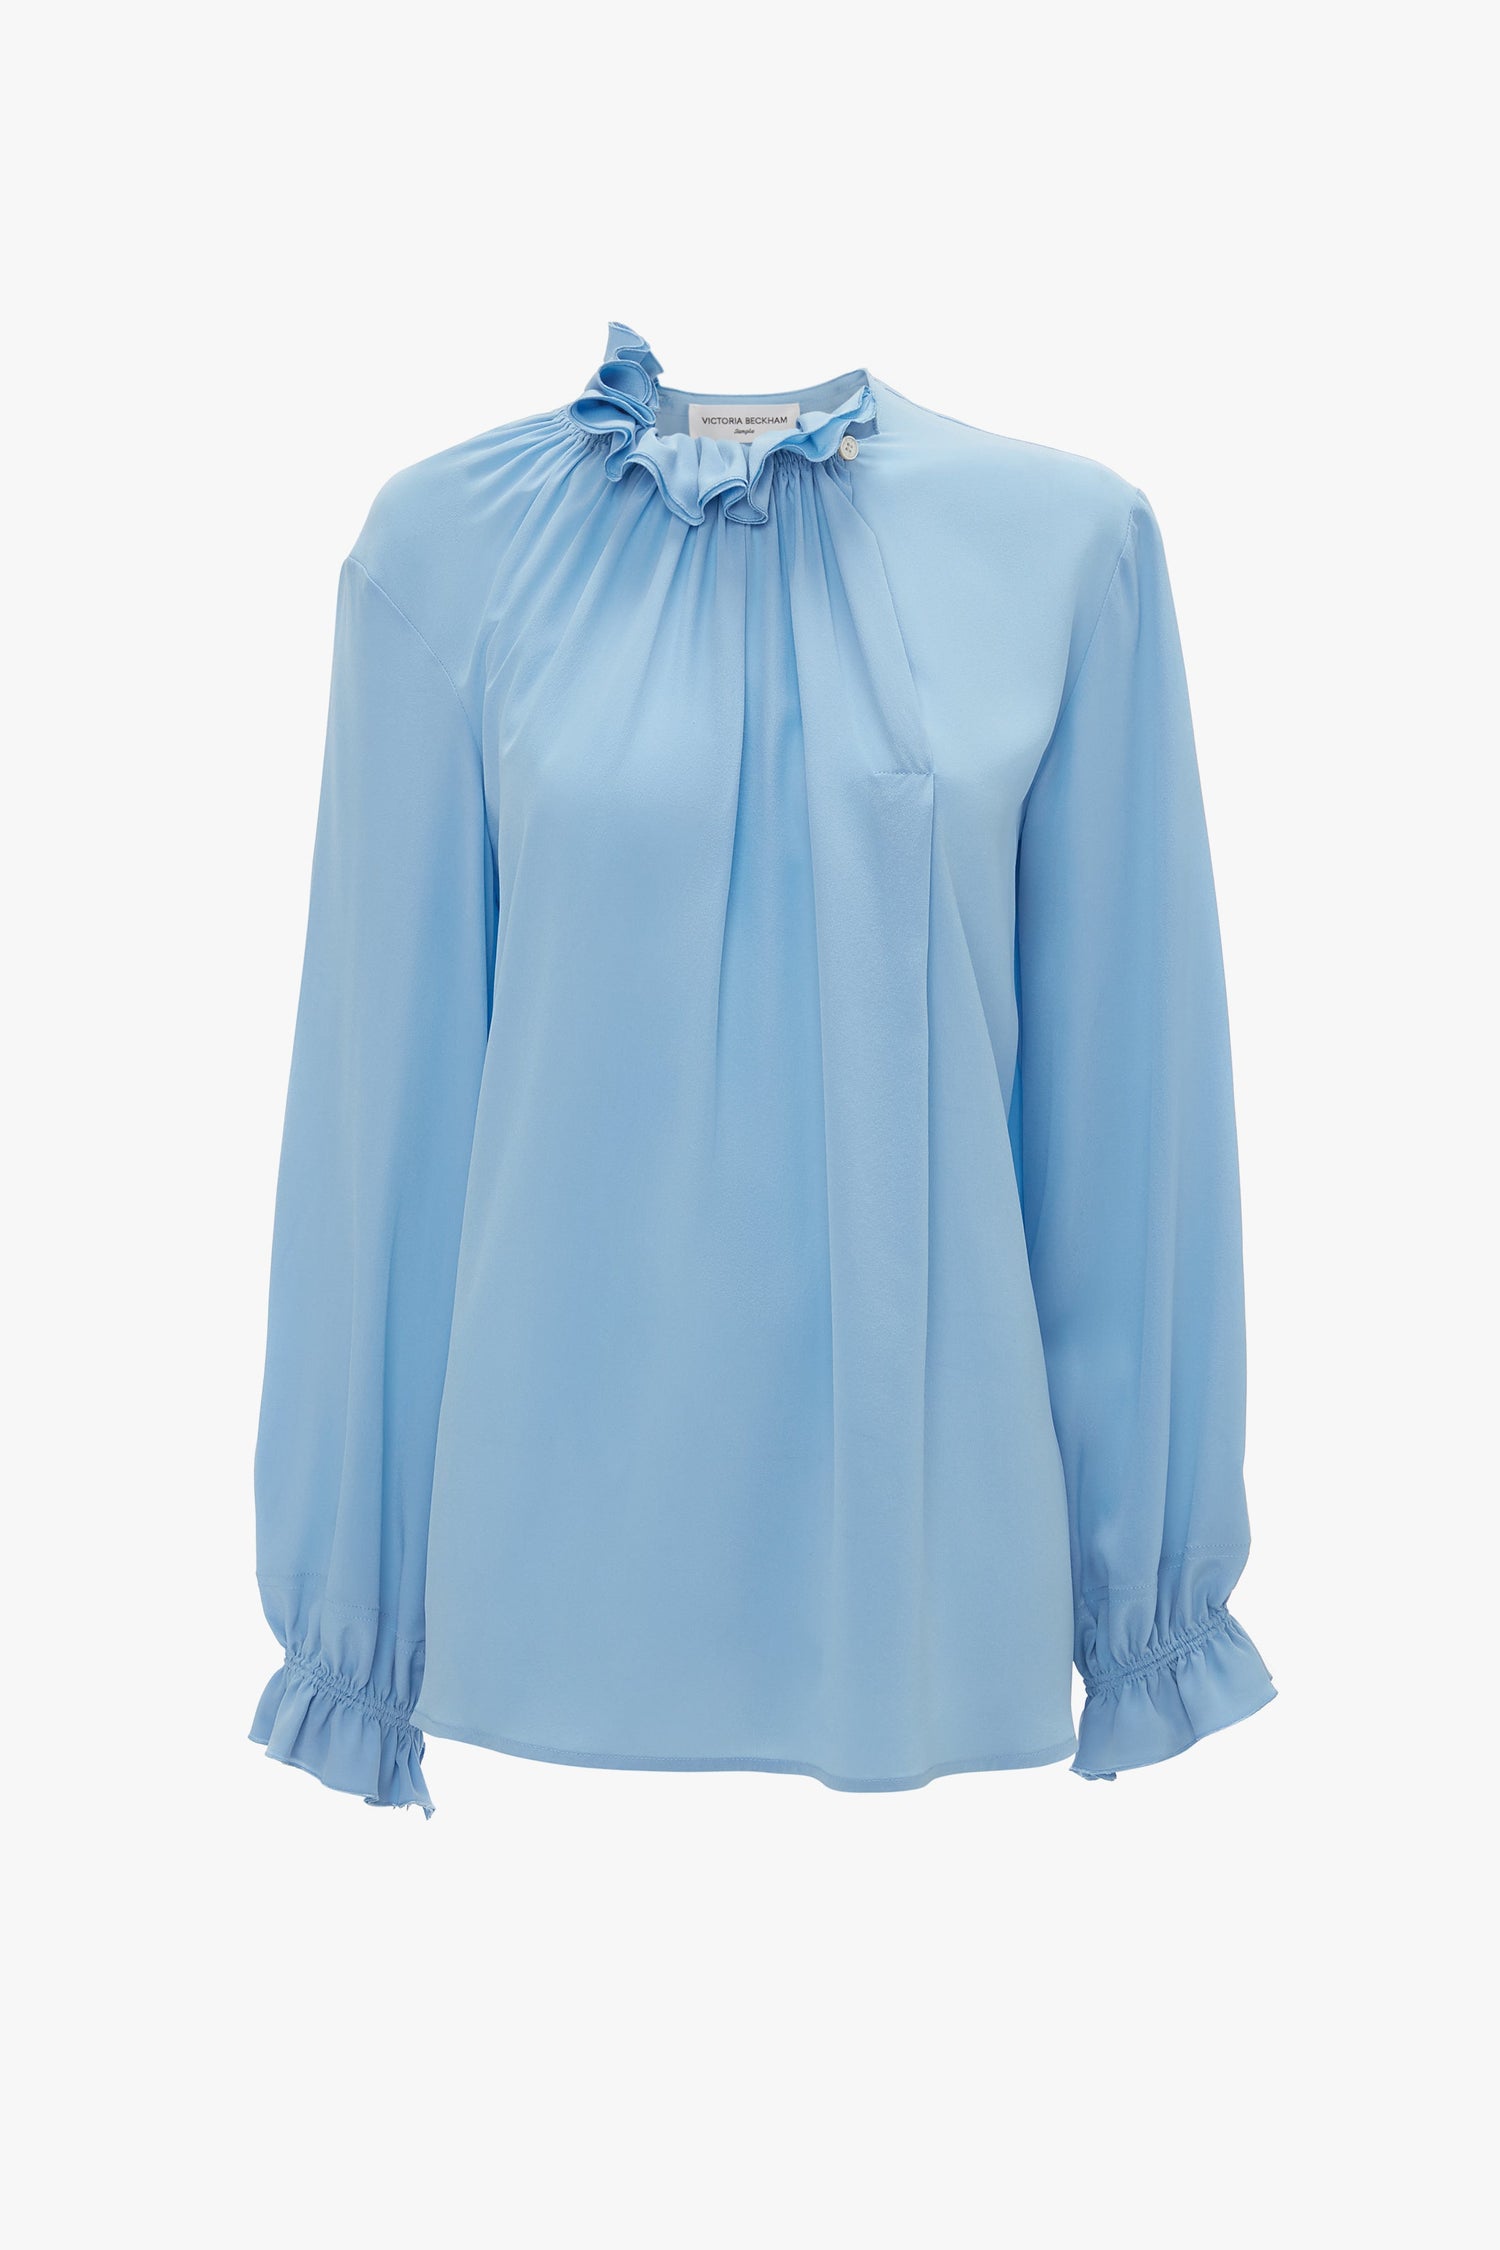 Victoria Beckham's Exclusive Ruffle Neck Blouse In Cornflower Blue features long sleeves, ruffle accents on the neckline and cuffs, and pleated detailing at the front.